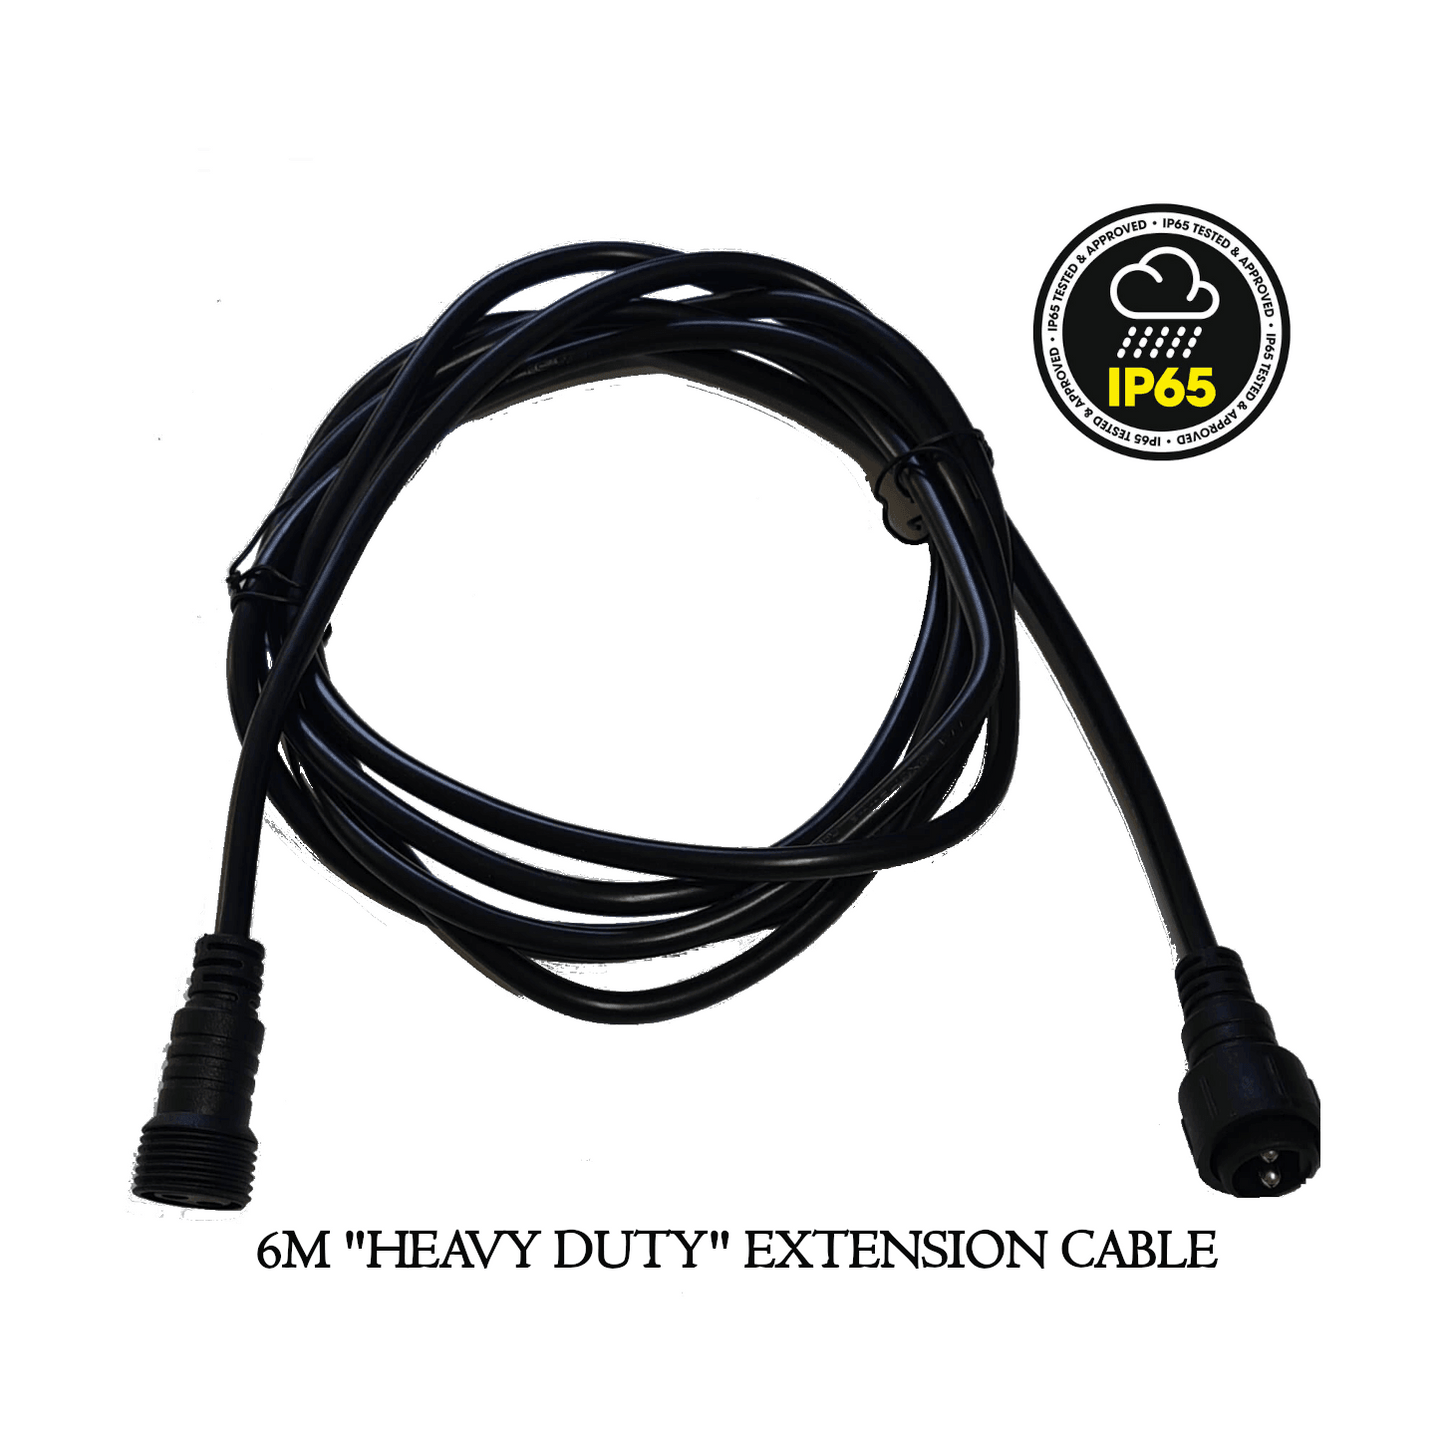 6 Metre Extension Cable For Heavy Duty Waterproof Outdoor String Lights - 6M